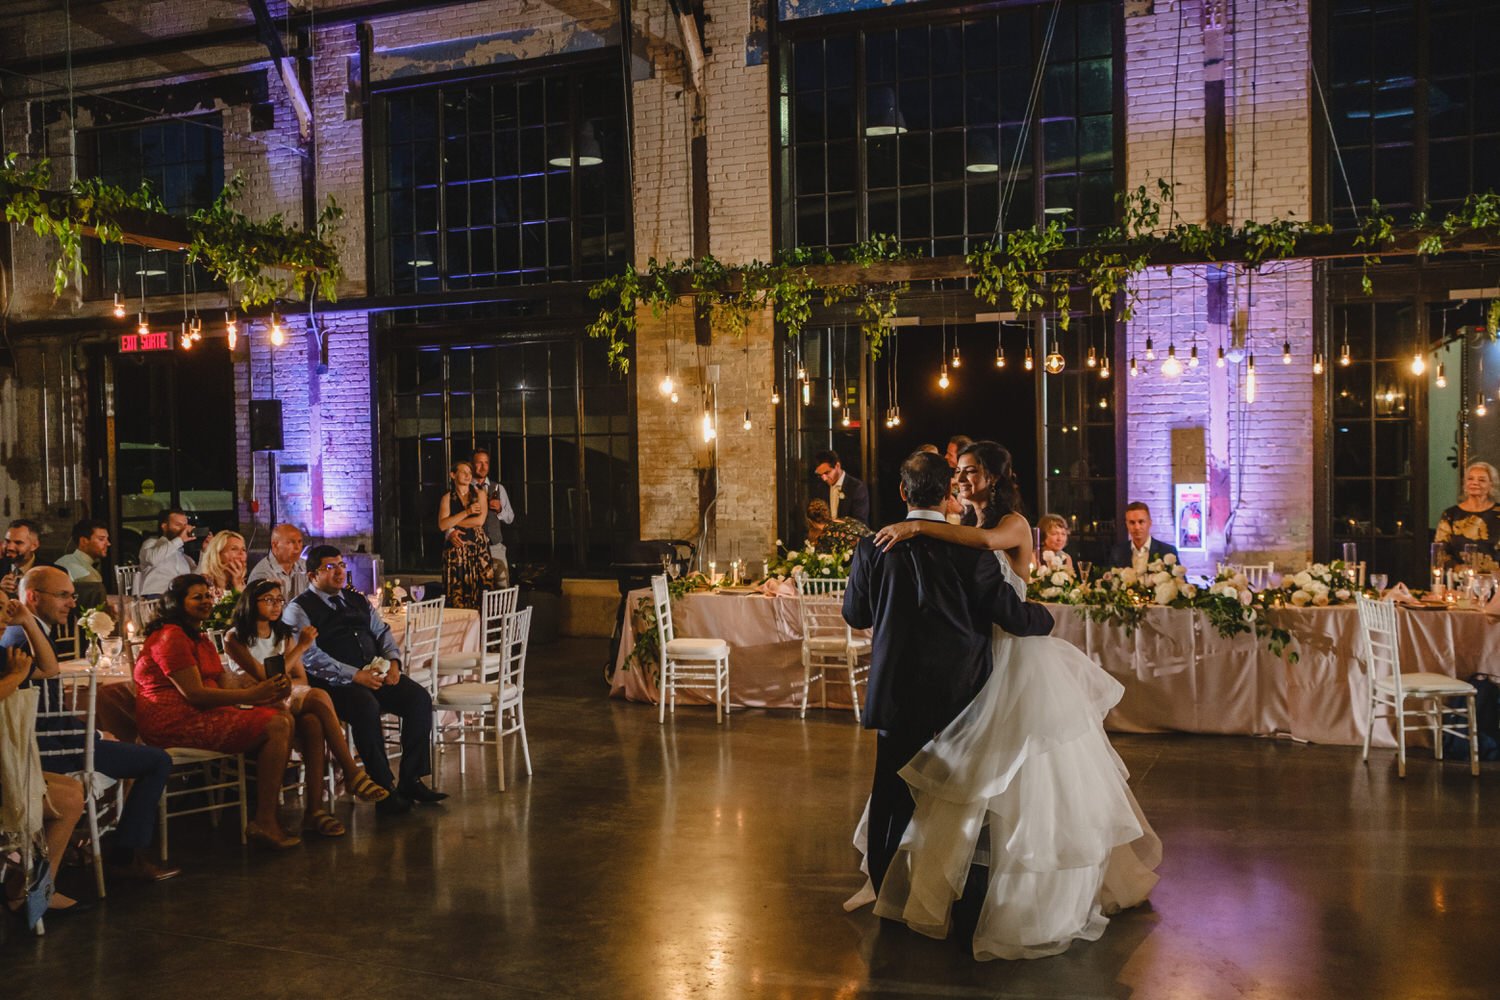 dancing photograph at a wedding reception at the horticulture building in ottawa